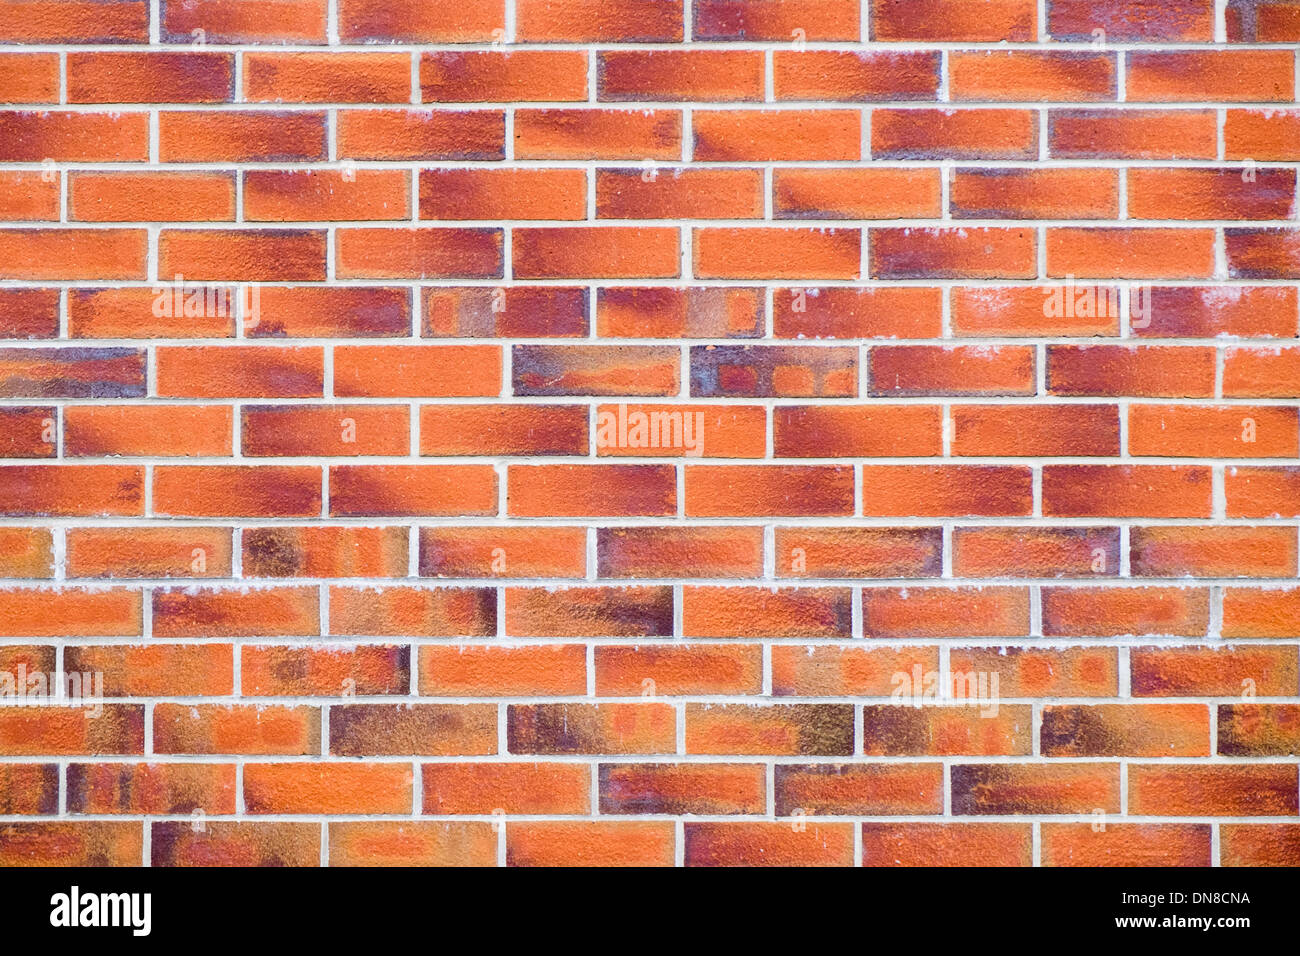 Plain flat red brick wall made of red bricks and mortar in straight lines. England UK Britain Stock Photo